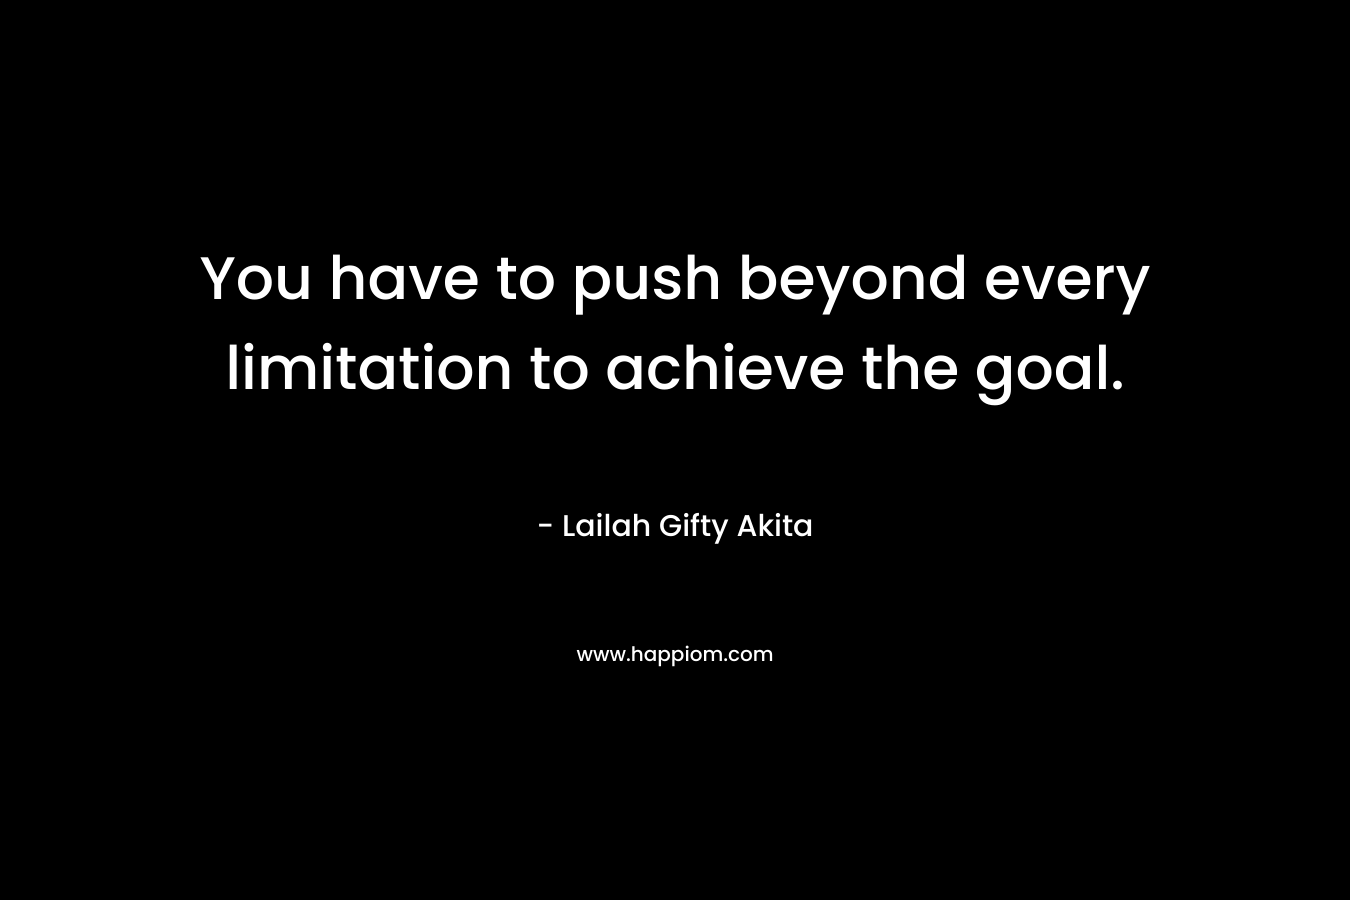 You have to push beyond every limitation to achieve the goal.